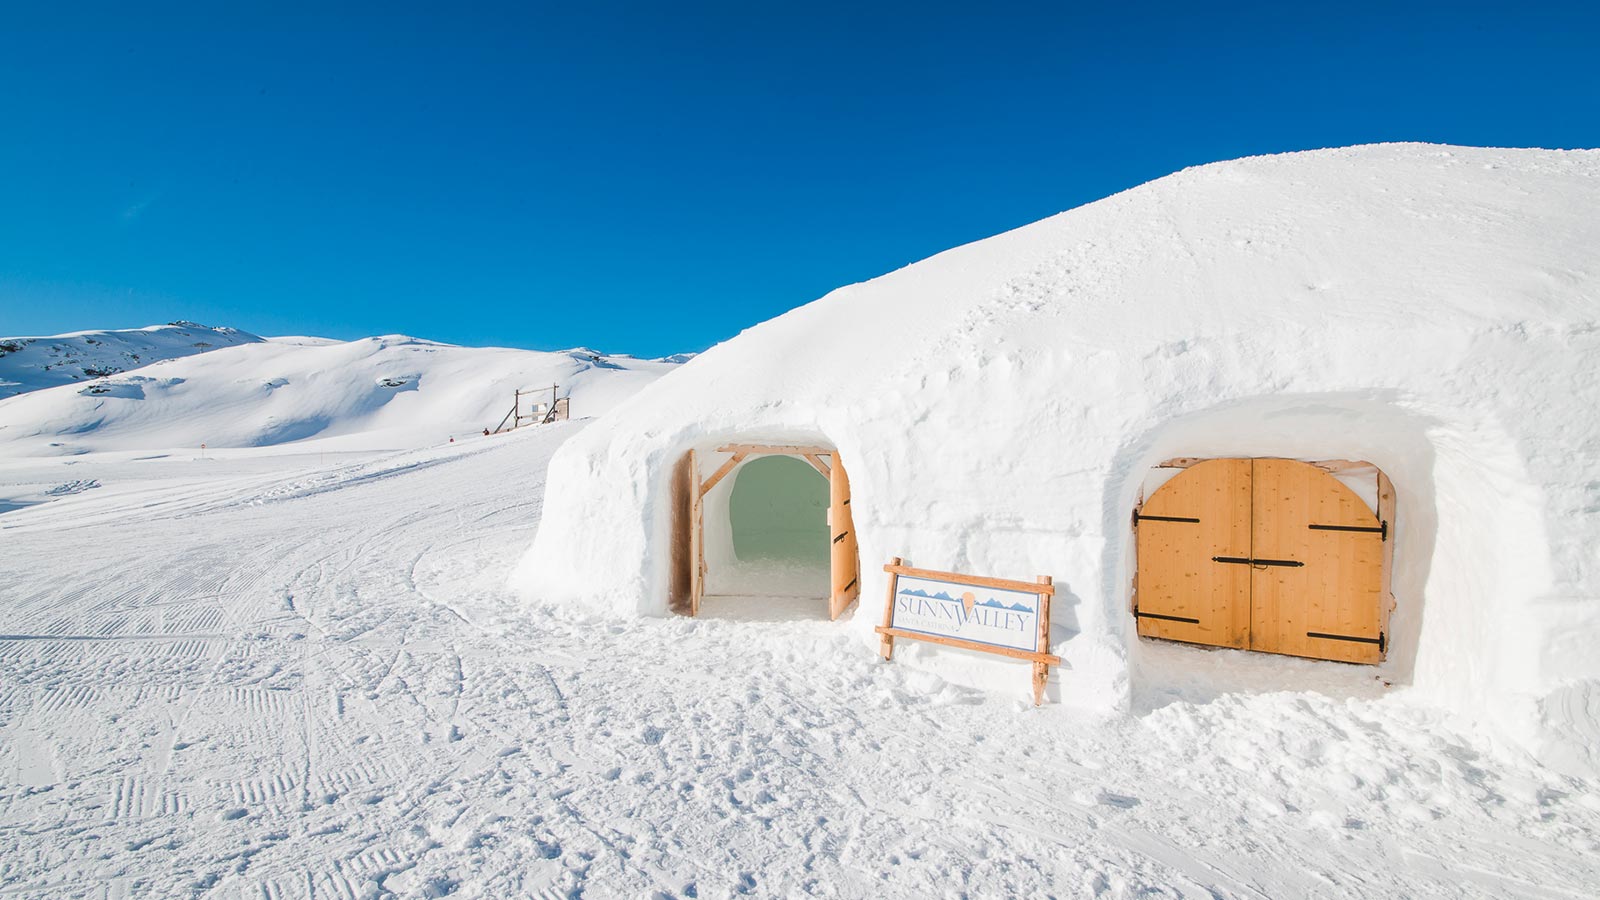 Sleep in an igloo surrounded by a wonderful landscape